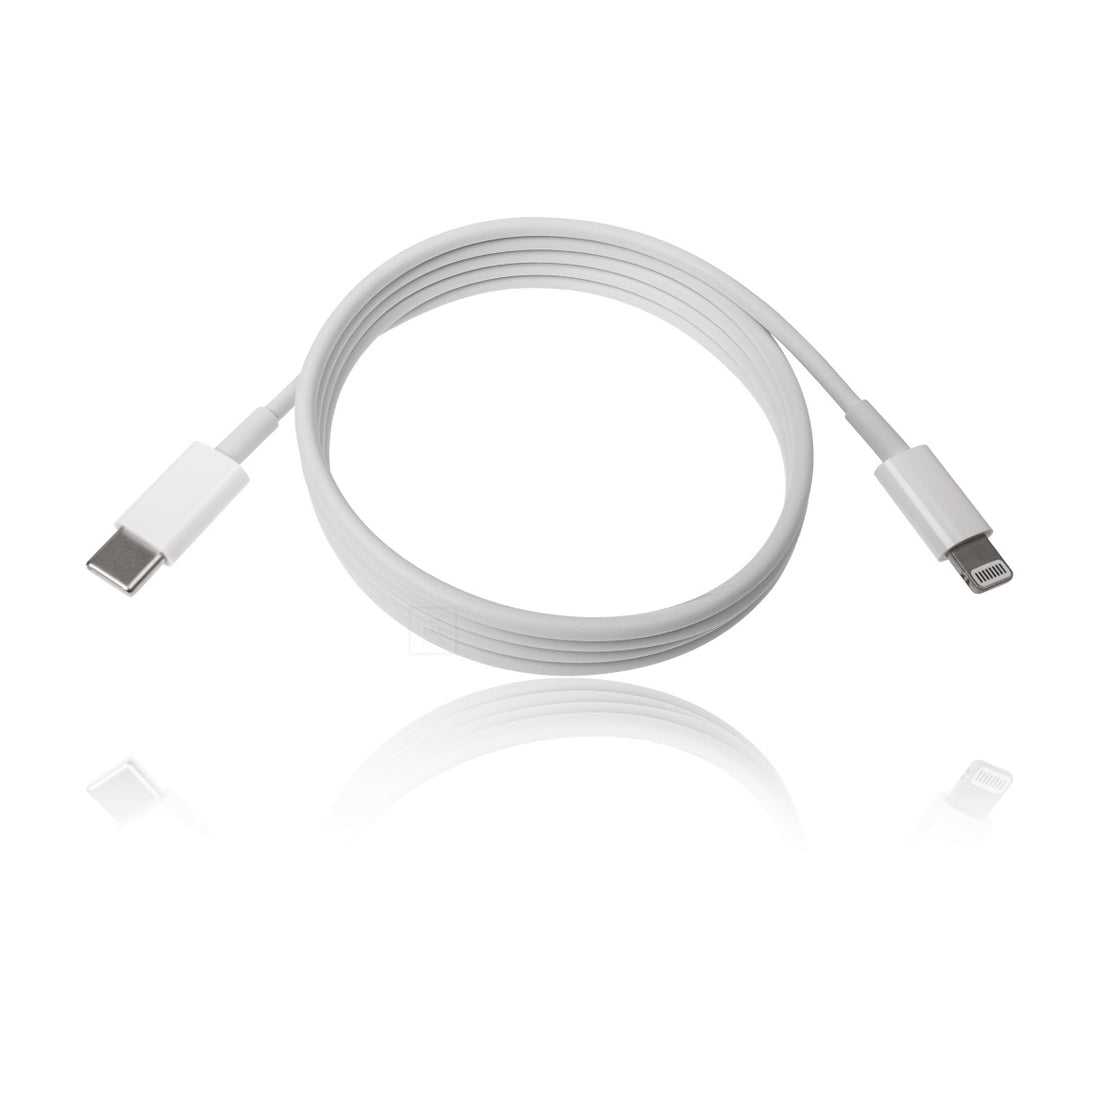 For tidlig Edition Andragende Apple AirPods Charging Cable Lightening/USB-C | OneEarPod